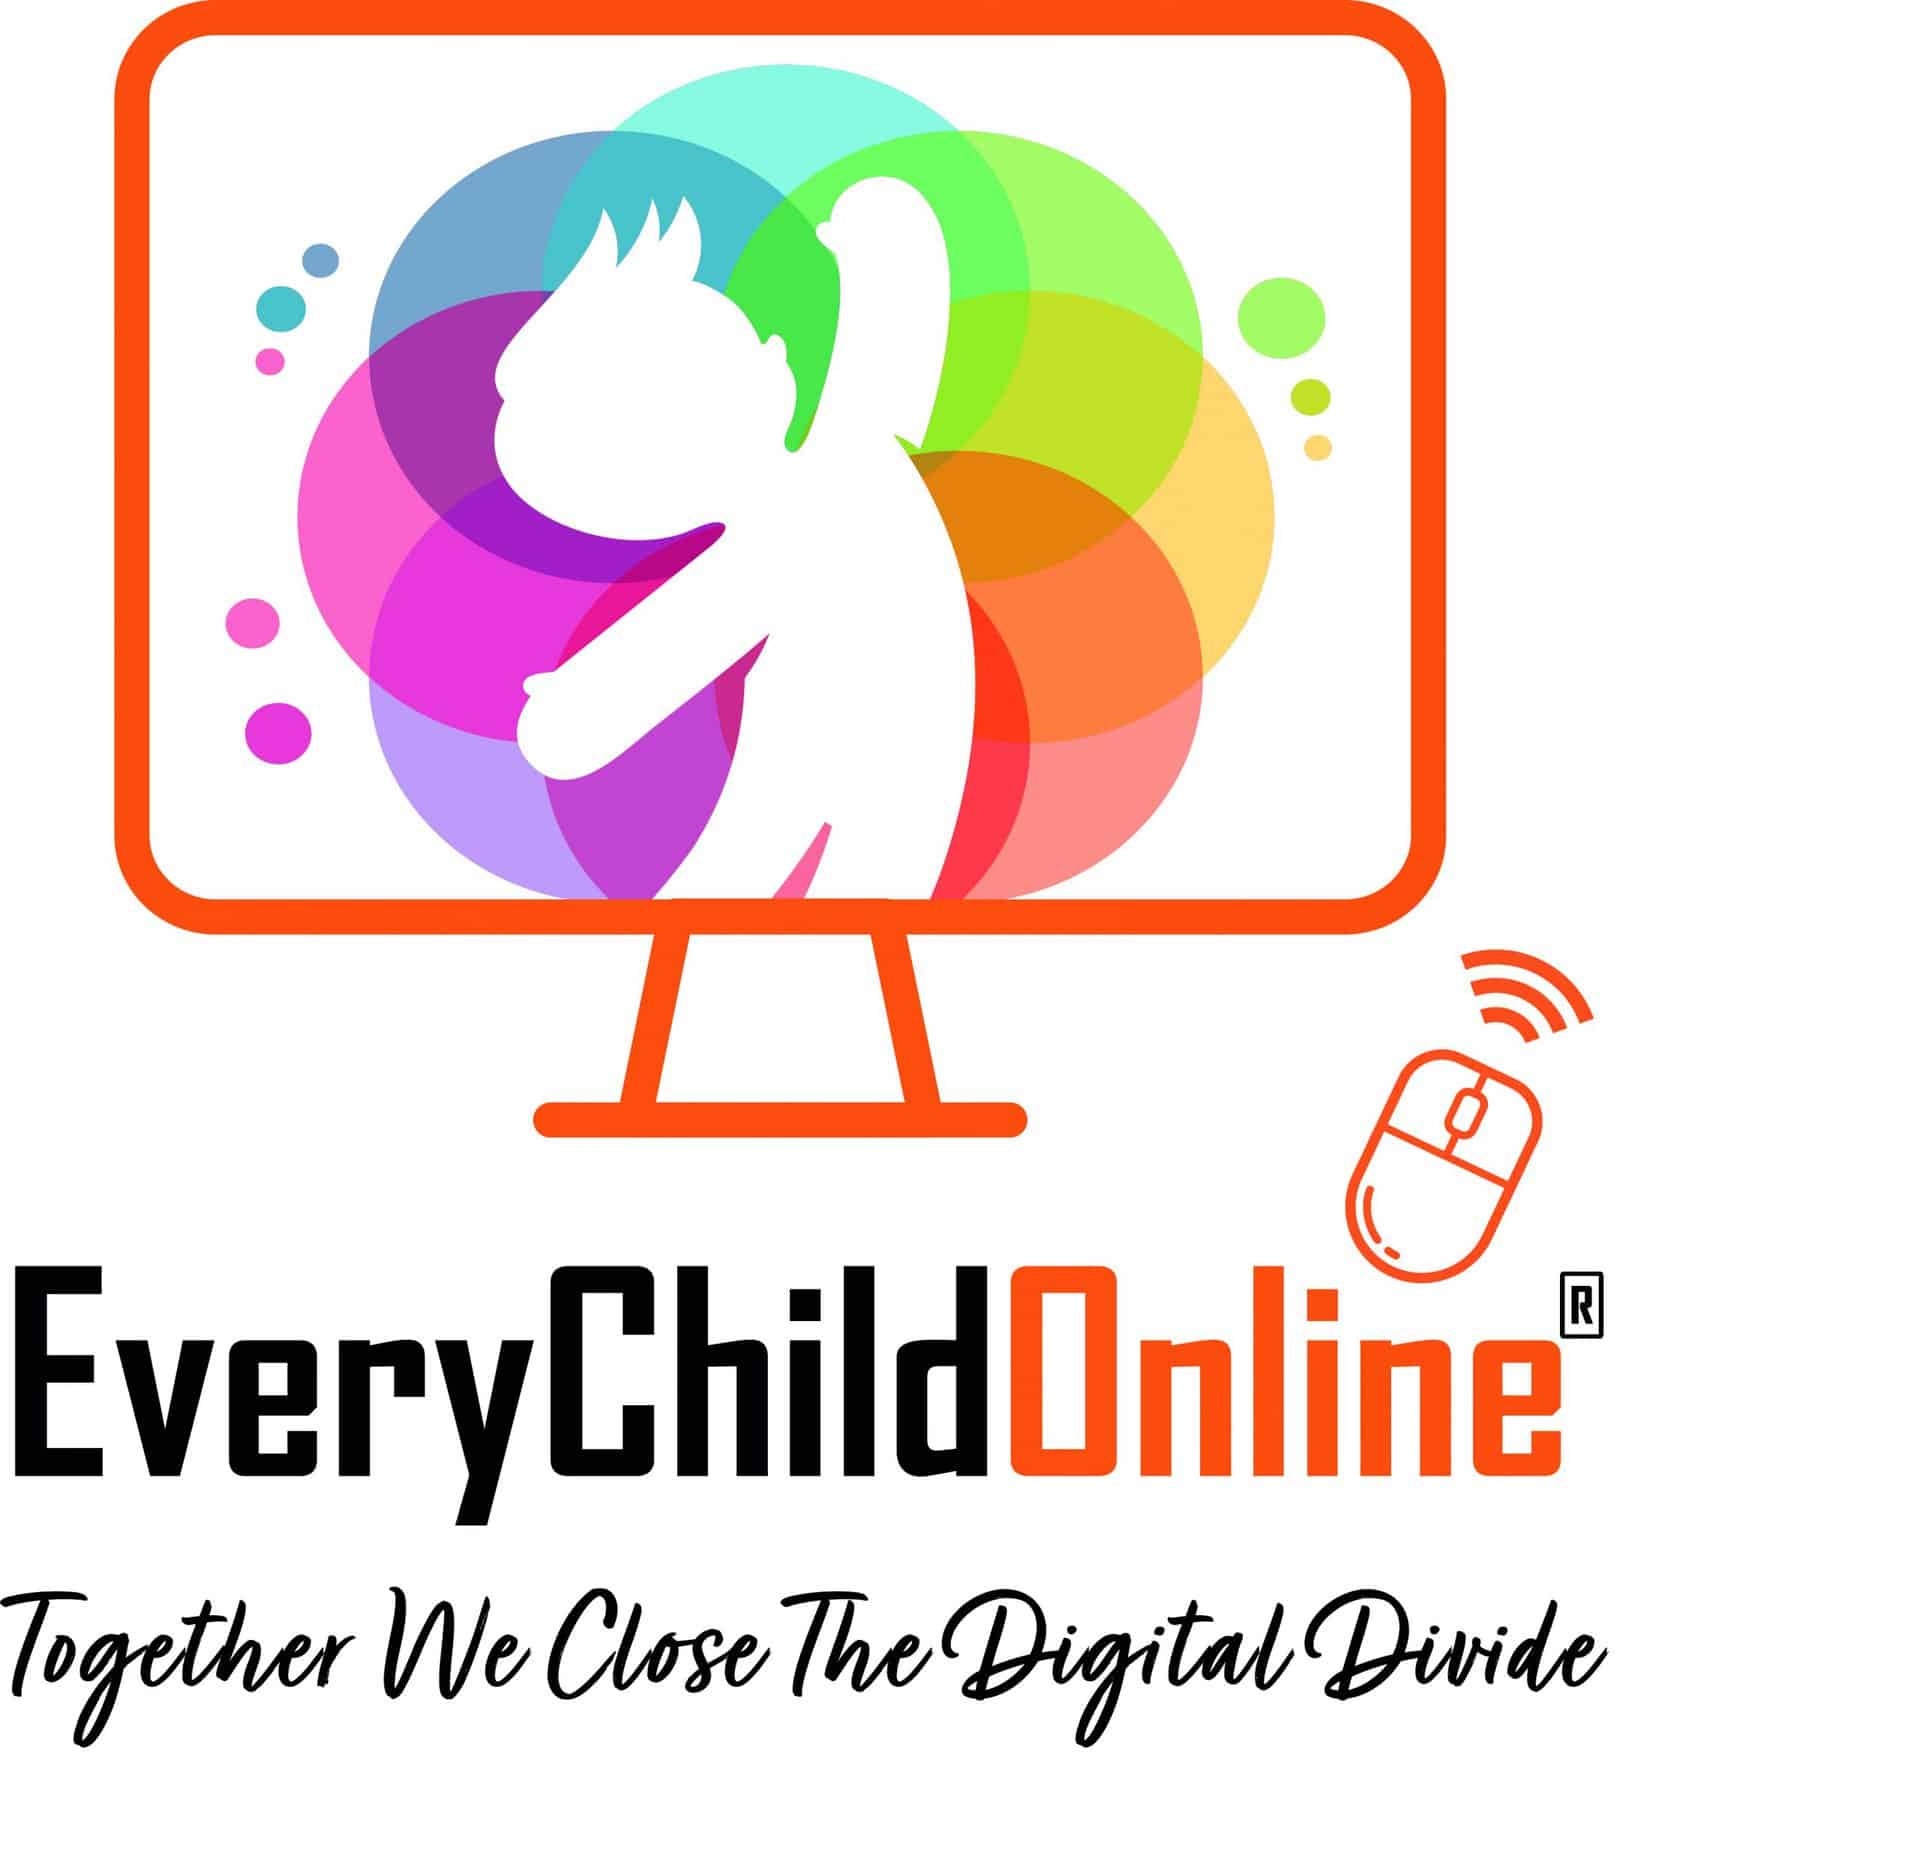 Featured image for “Charity Every Child Online partners with NSPCC’s Childline to empower vulnerable children through technology”